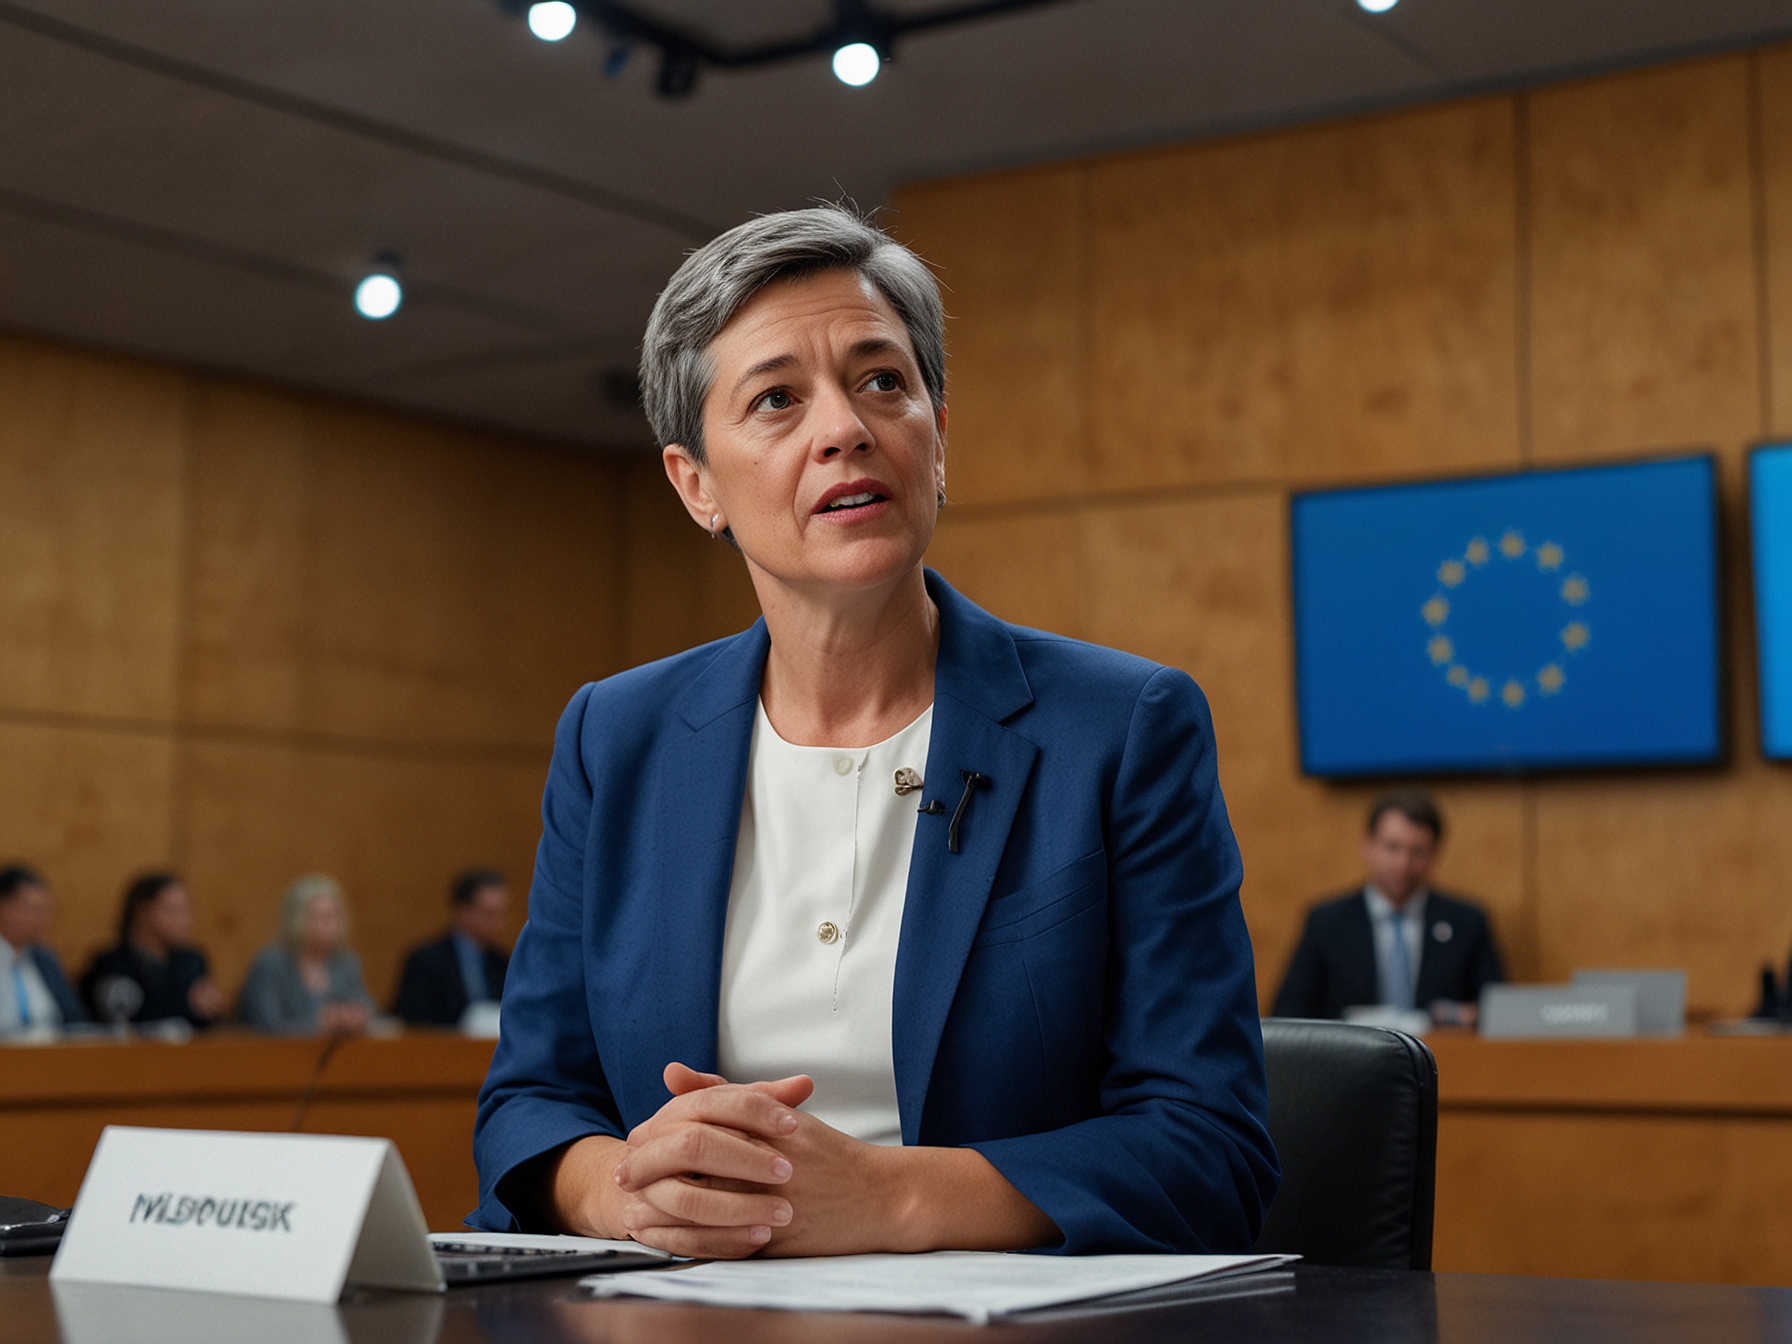 An image of Margrethe Vestager, the EU competition commissioner, speaking at a press conference, highlighting the EU's intent to investigate Microsoft's partnership with OpenAI and Google's AI advancements.